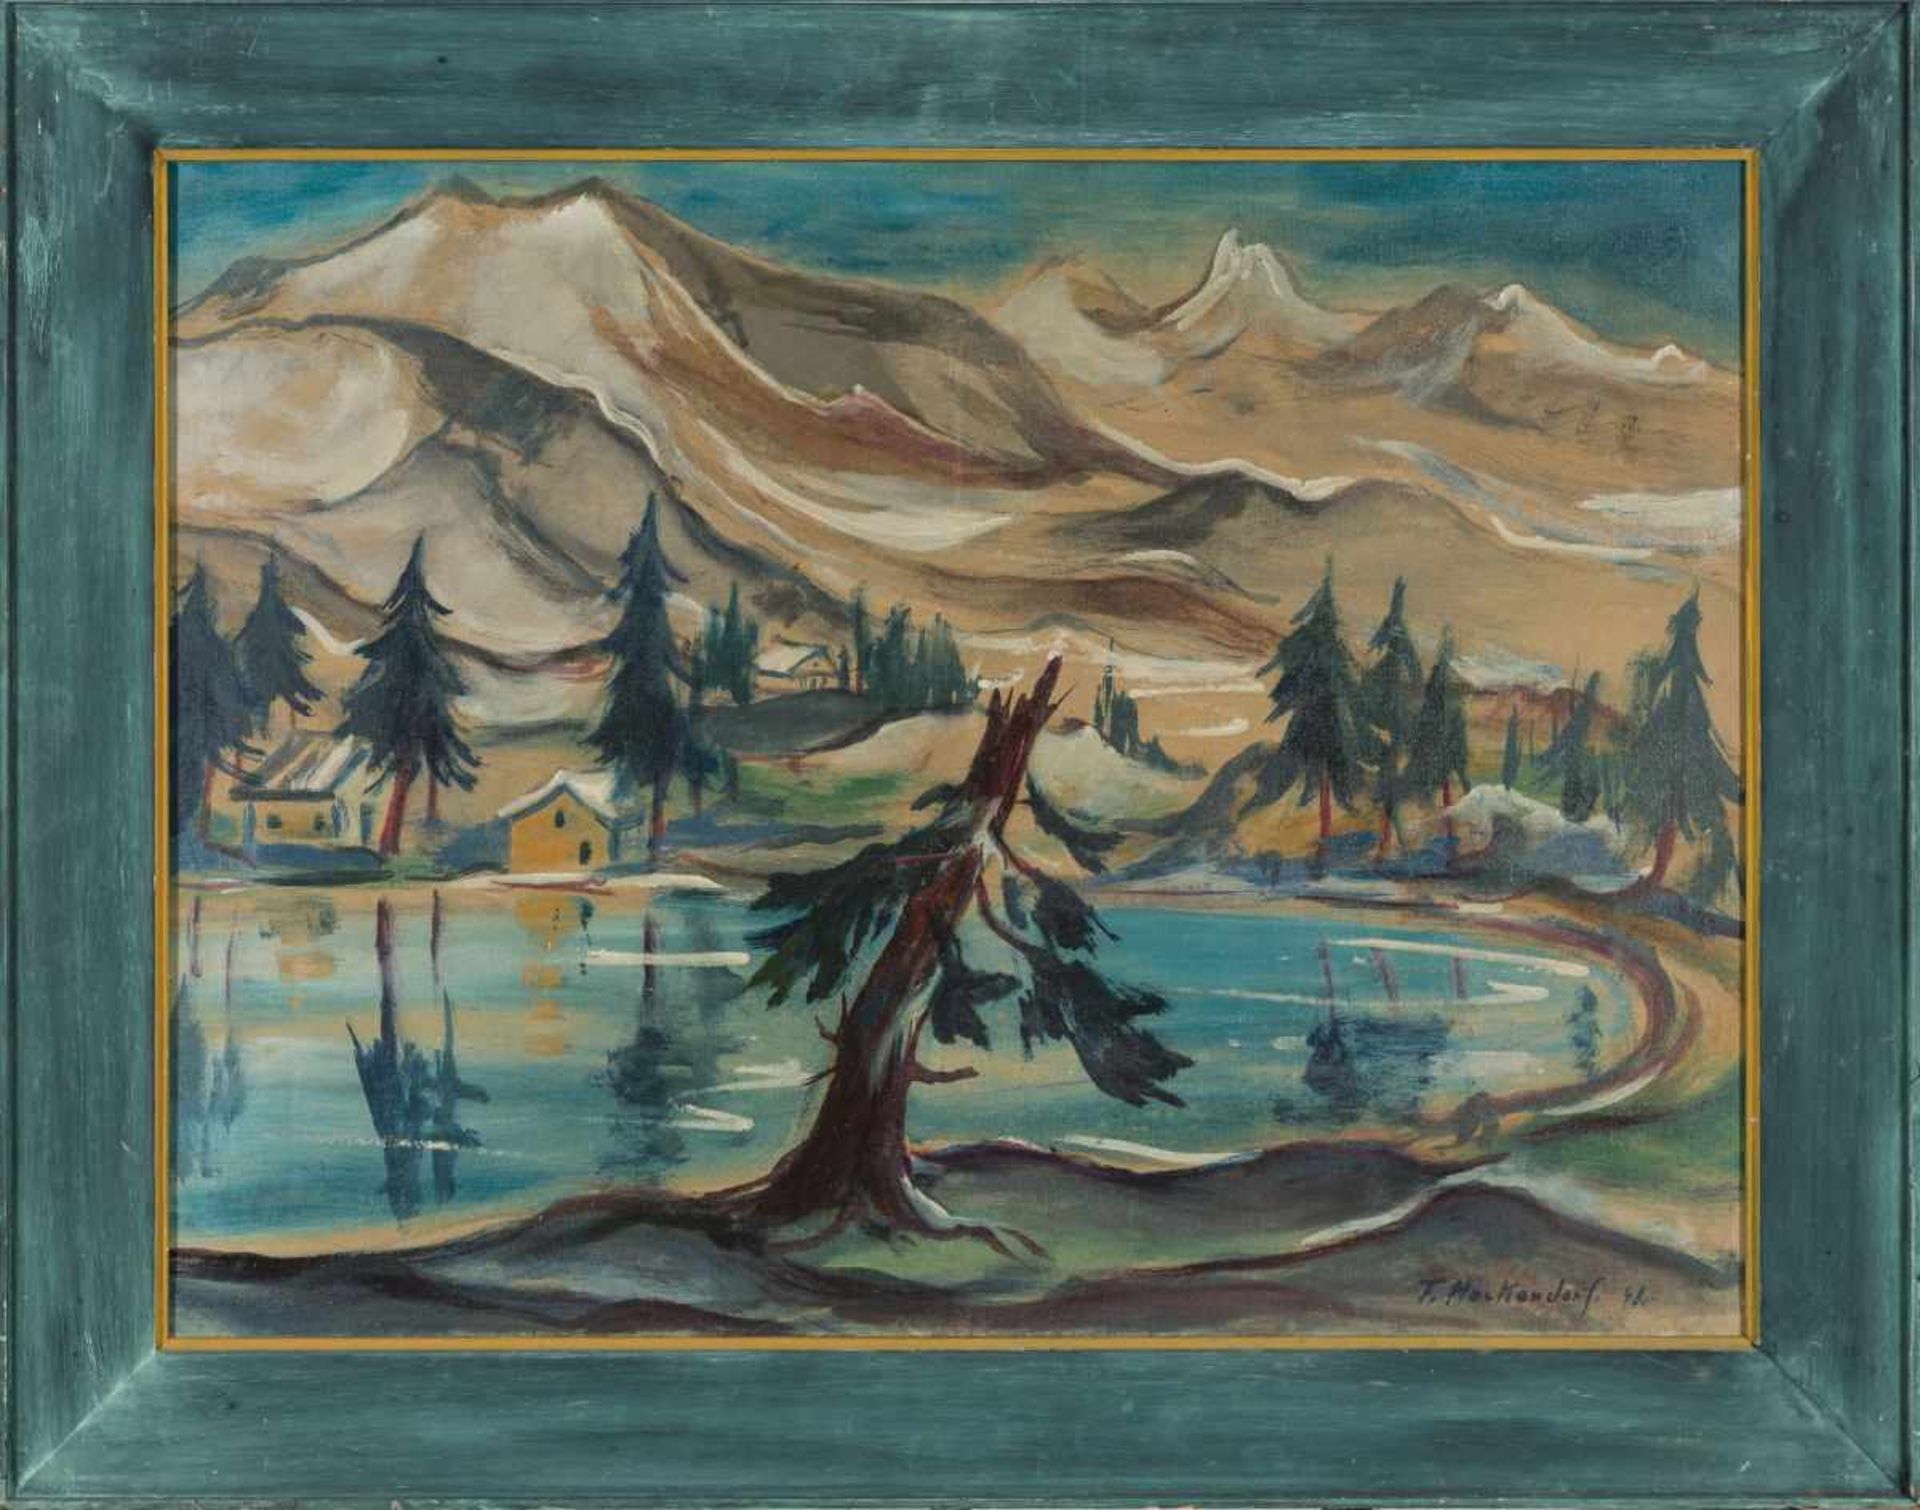 Heckendorf, FranzMountain Lake, 1948Oil on Canvassigned and dated lower right19,9 x 32,2 inrental - Bild 2 aus 2